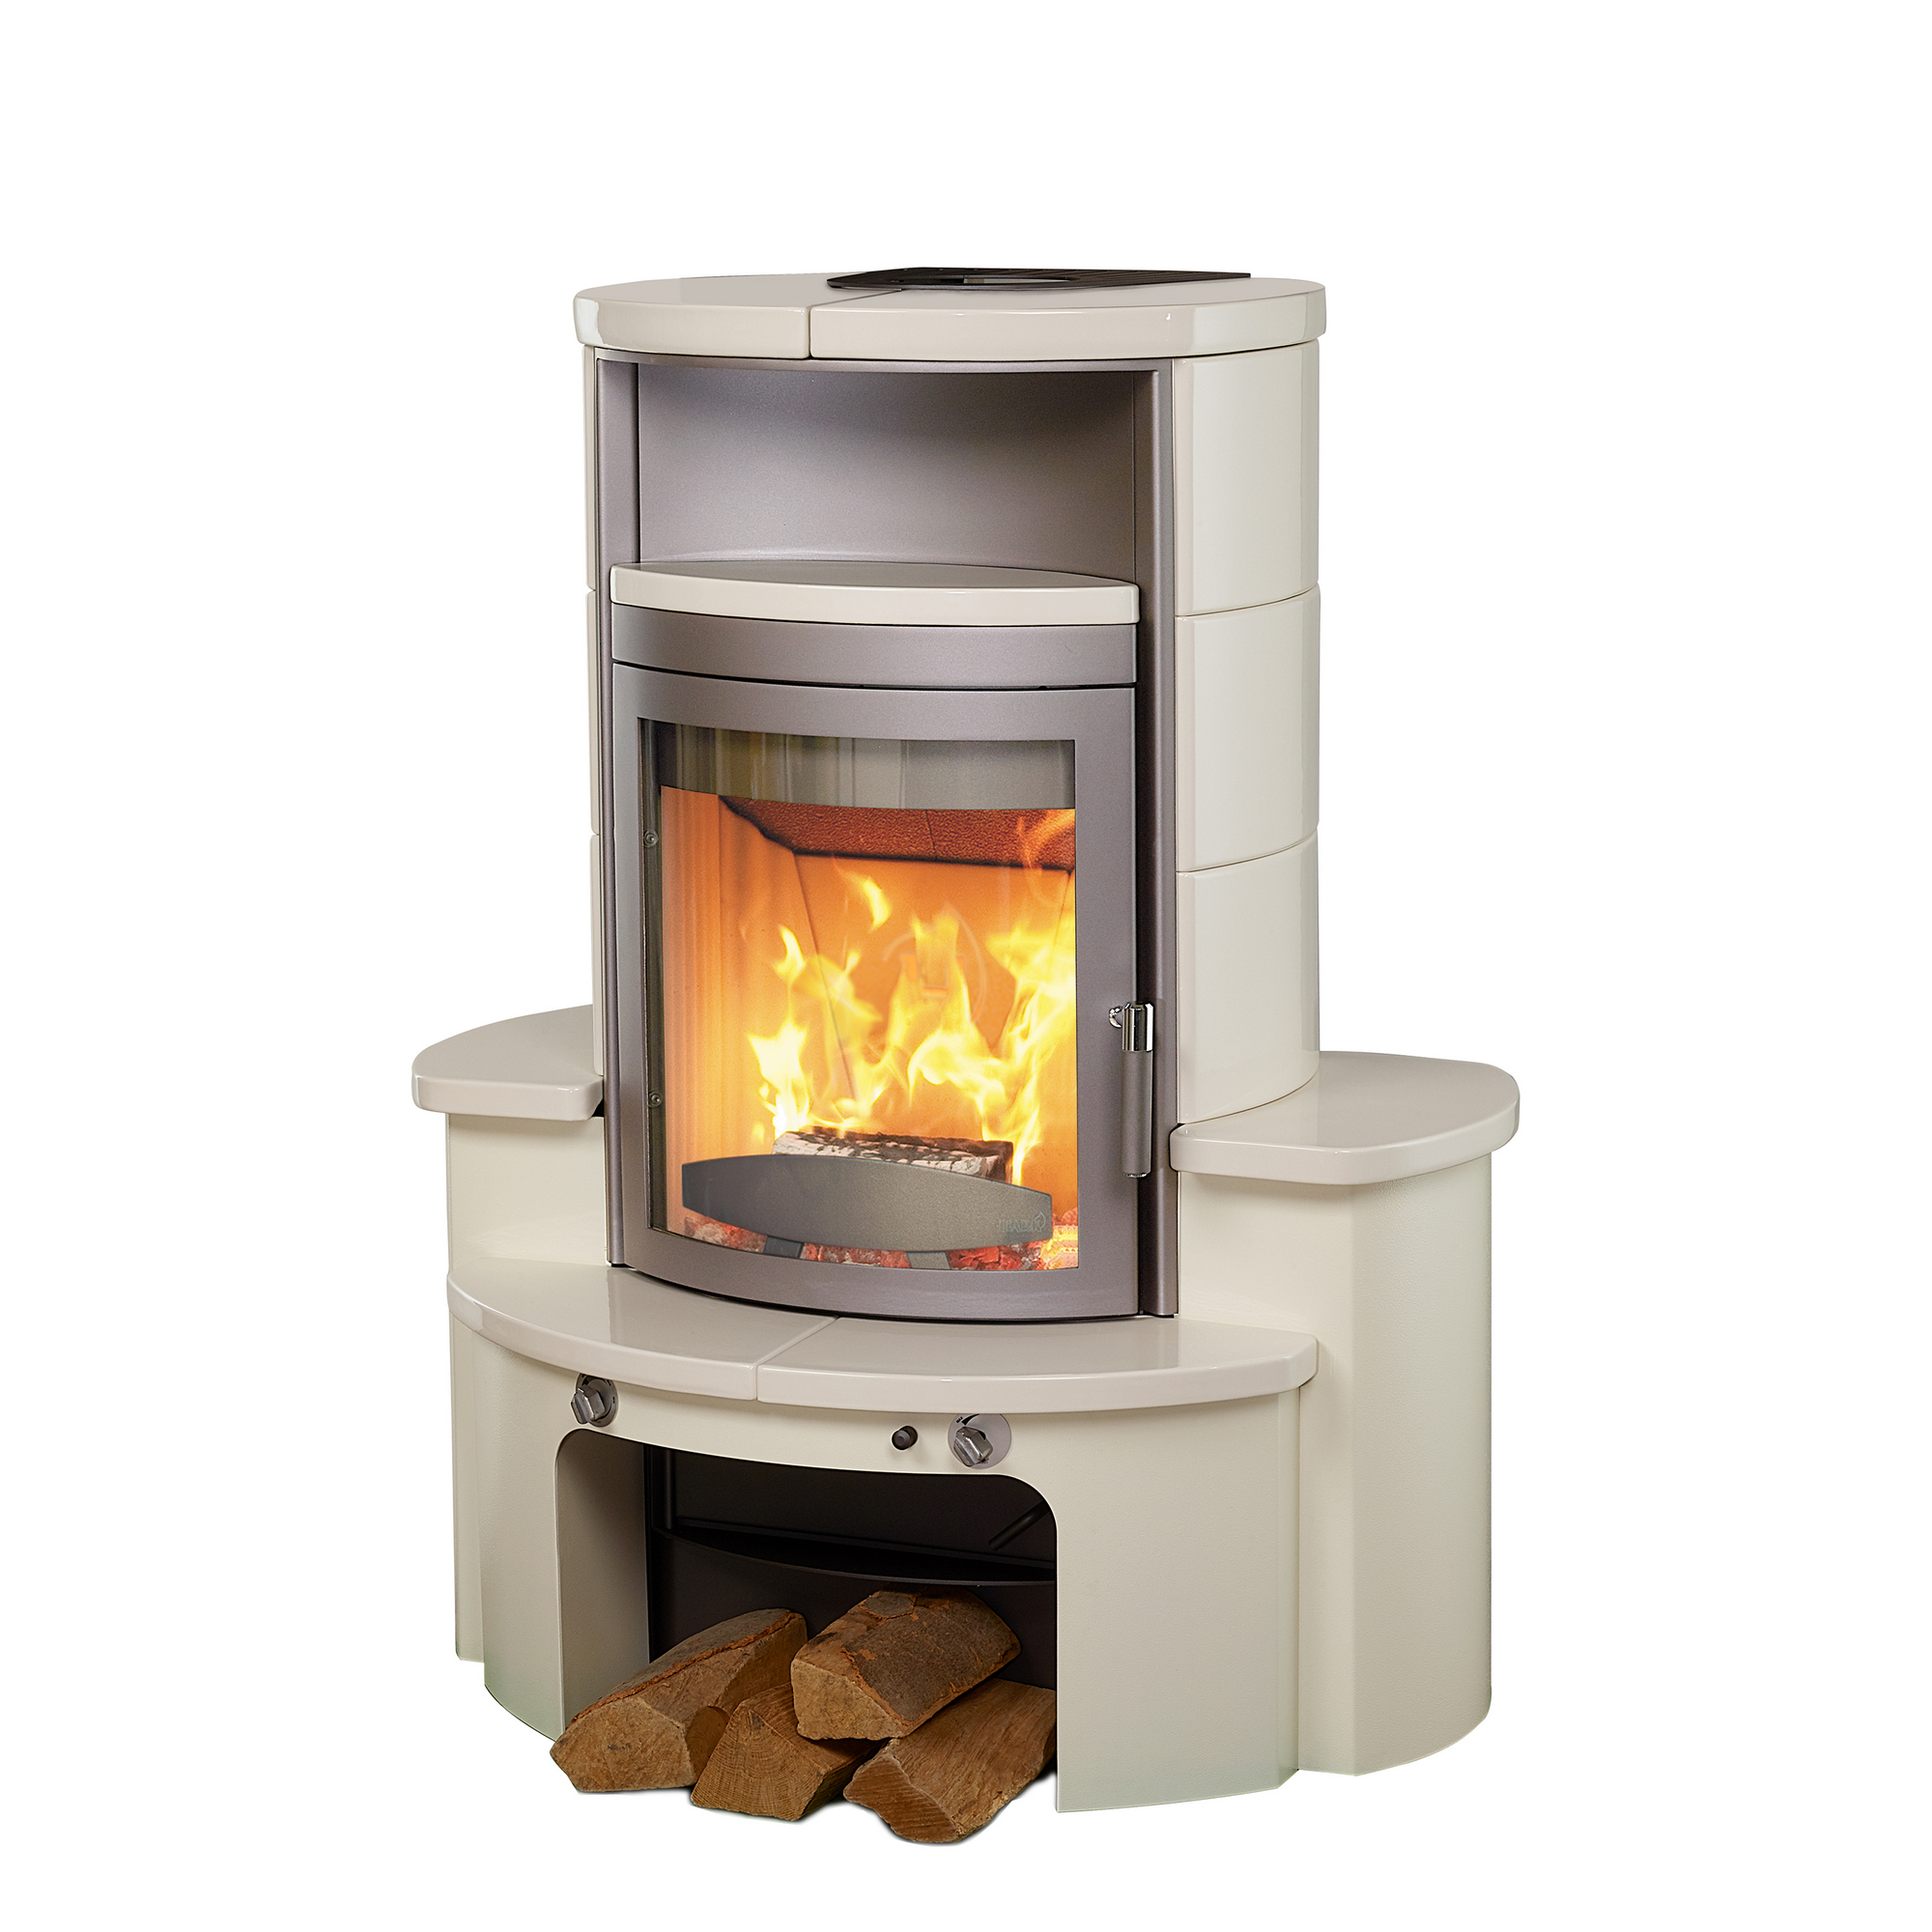 Kaminofen 'Avenso GT ECOplus' titan/creme-weiß 6 kW + product picture